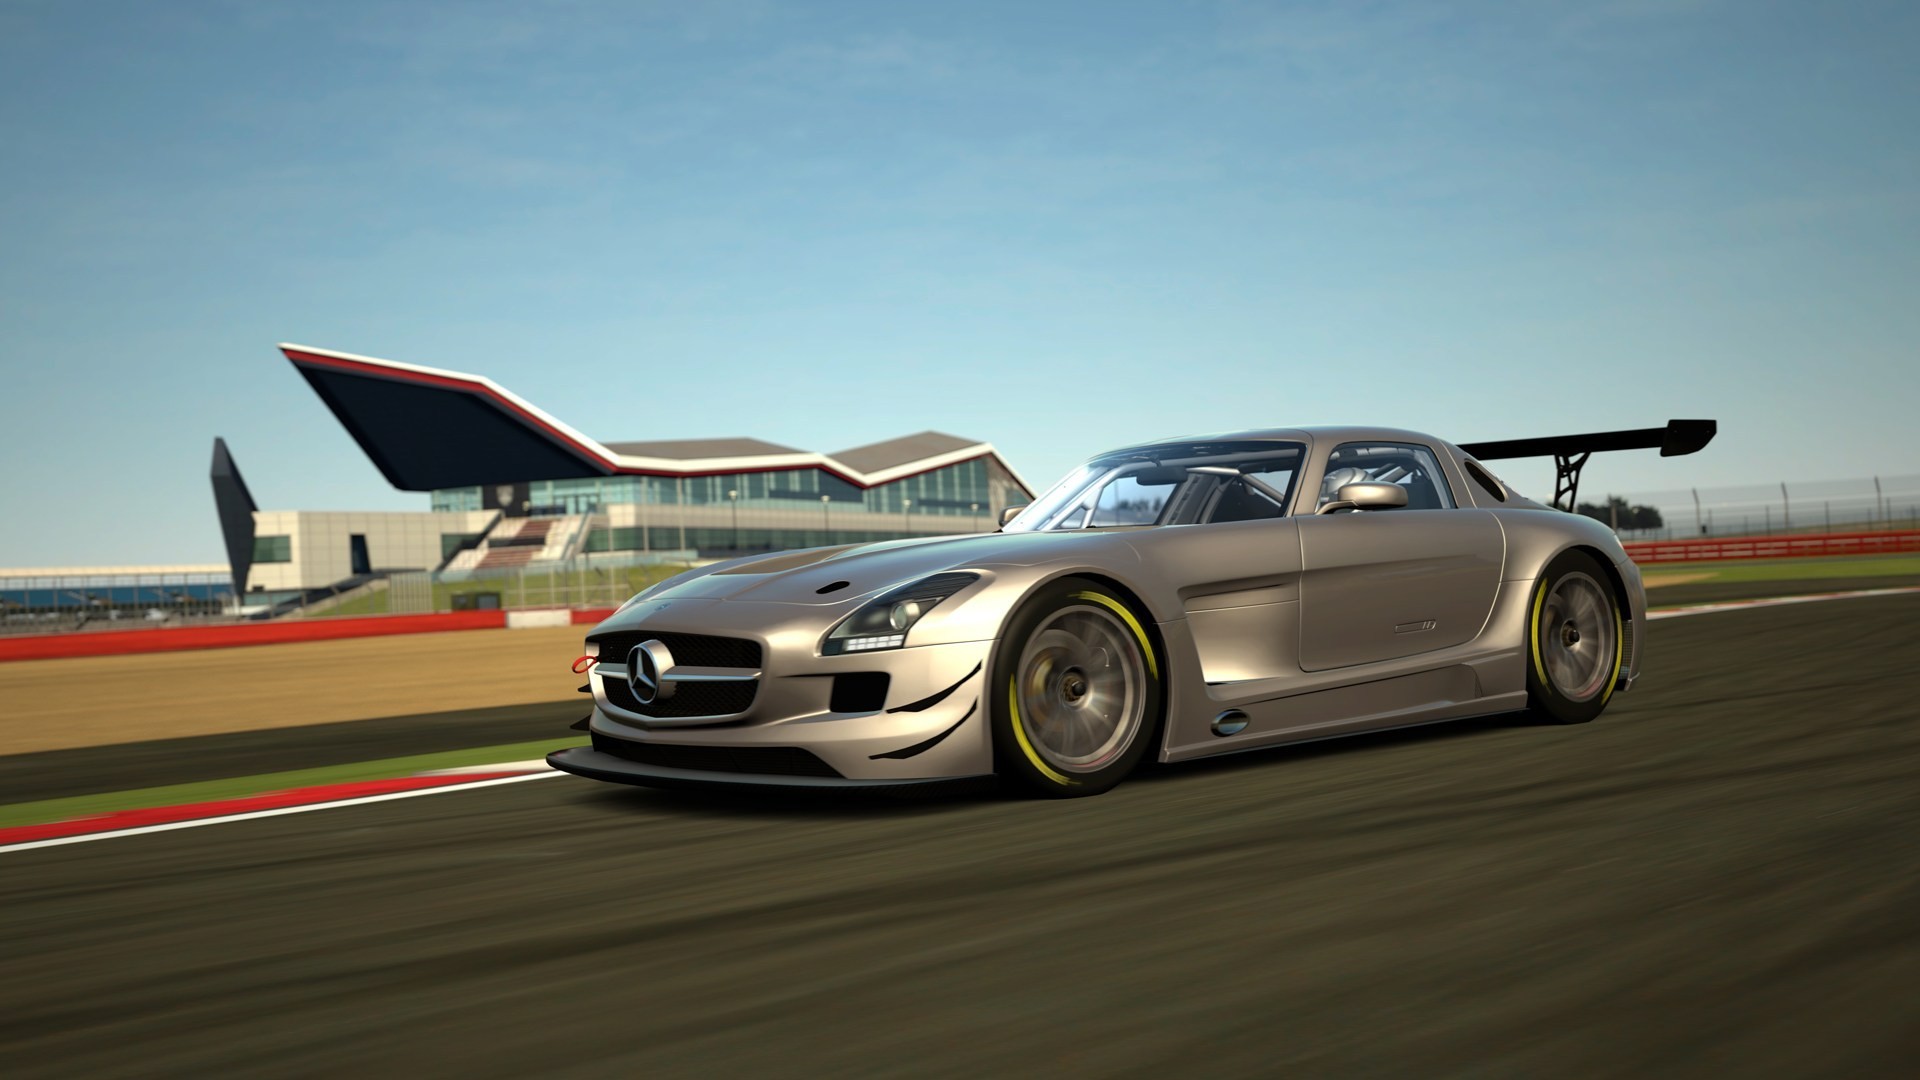 Gran Turismo could be released for PCs soon, says series creator
